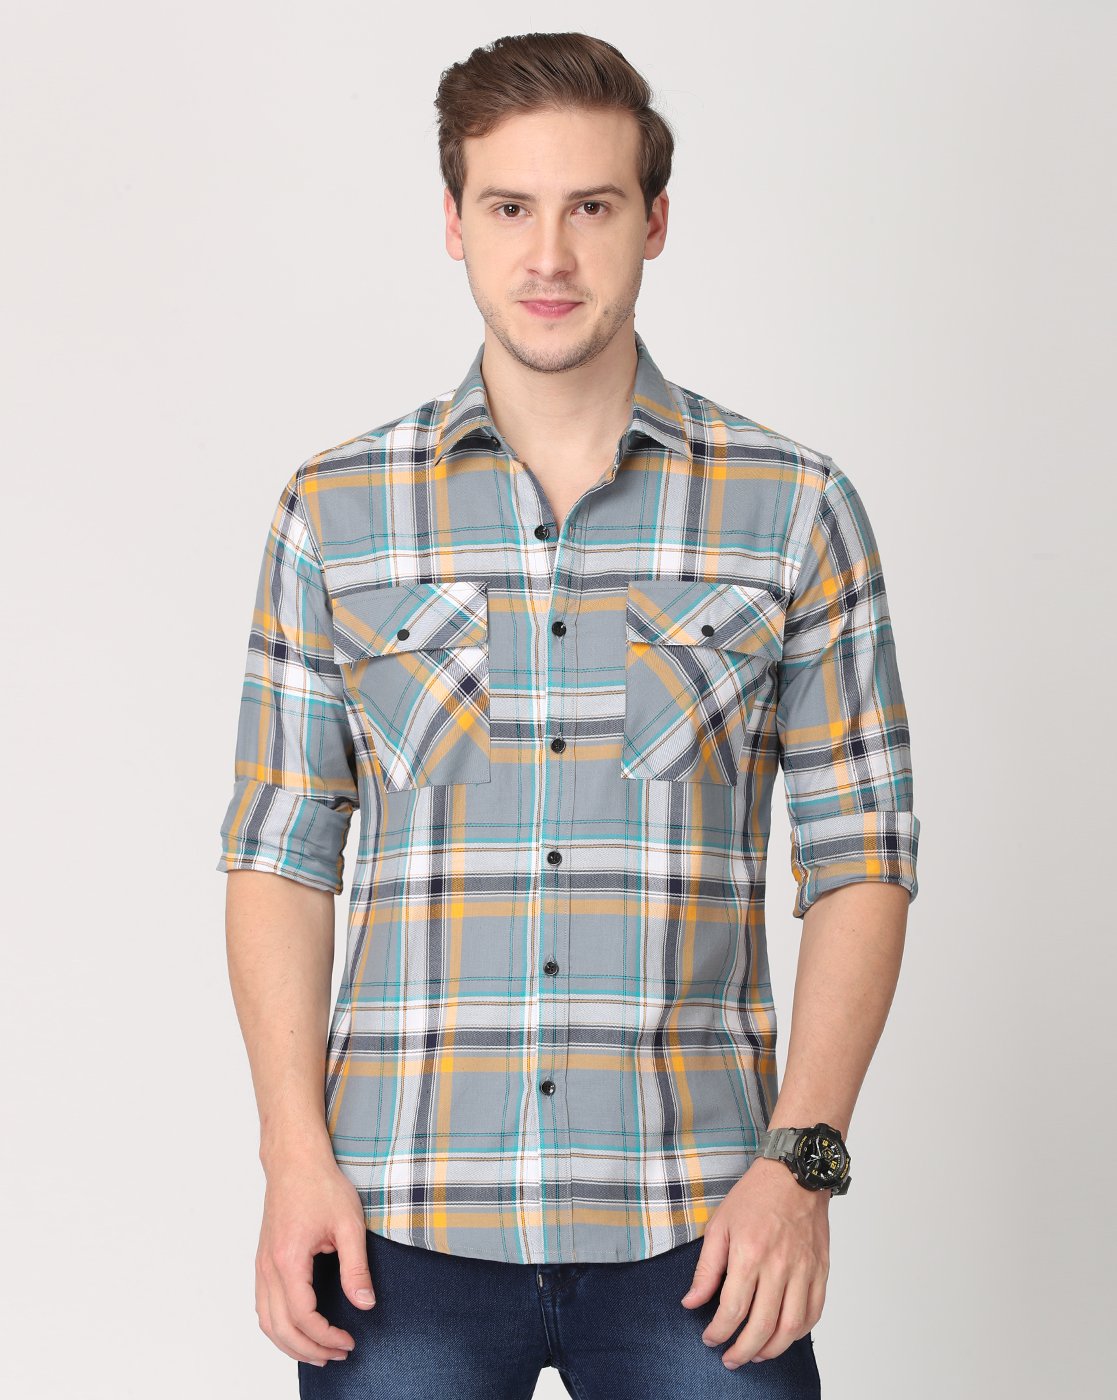 Grey, Yellow and Light Blue Double Pocket Shirt Shirts KEF 